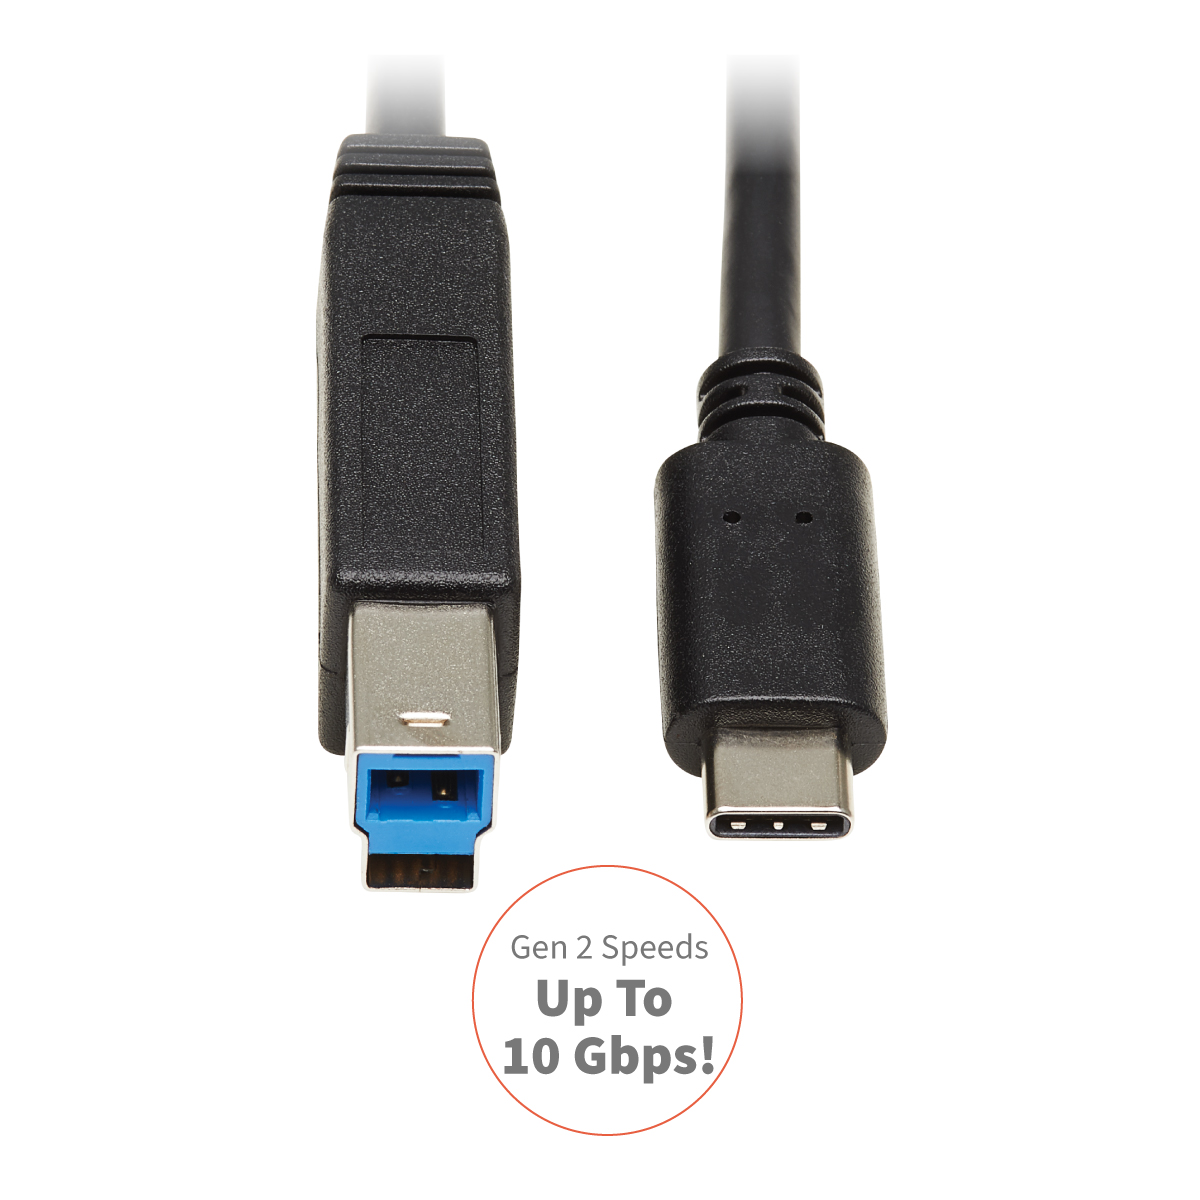 USB-C to USB-B Cable - USB 3.2 Gen 2, 10 Gbps, Thunderbolt 3 Compatible, 20  in.